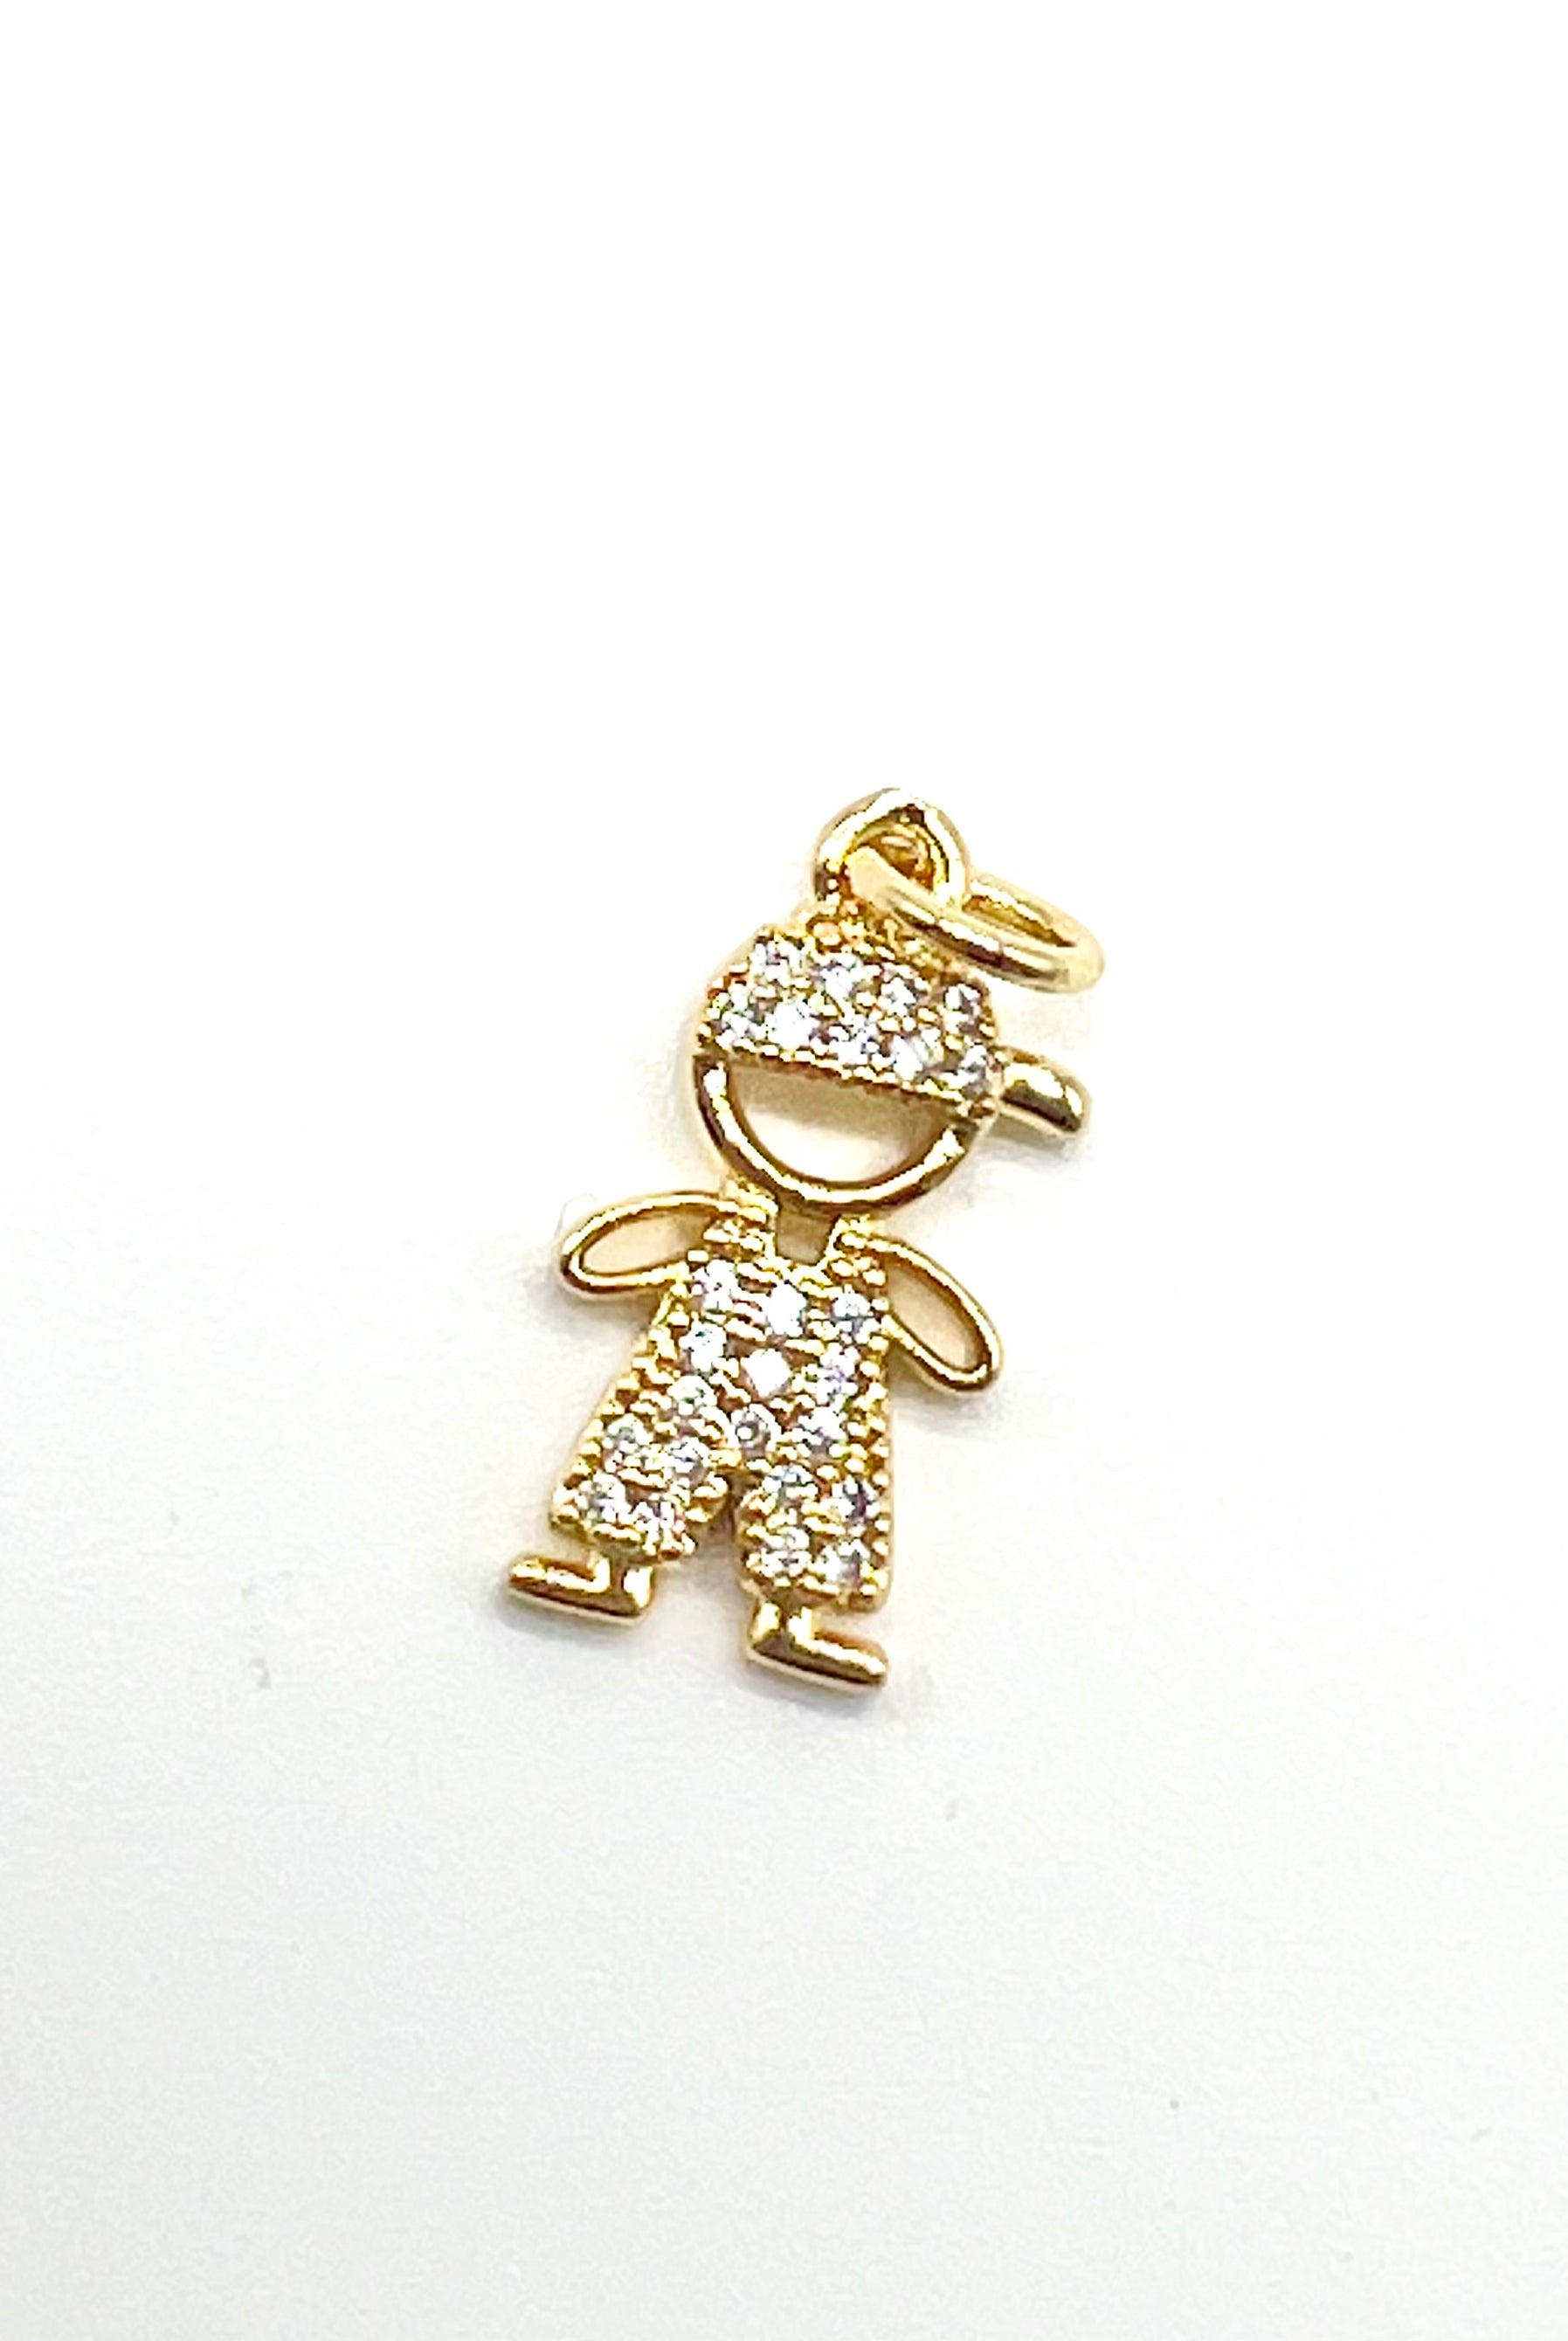 Cute Collection Charm-310 Jewelry-Treasure Jewels-Heathered Boho Boutique, Women's Fashion and Accessories in Palmetto, FL